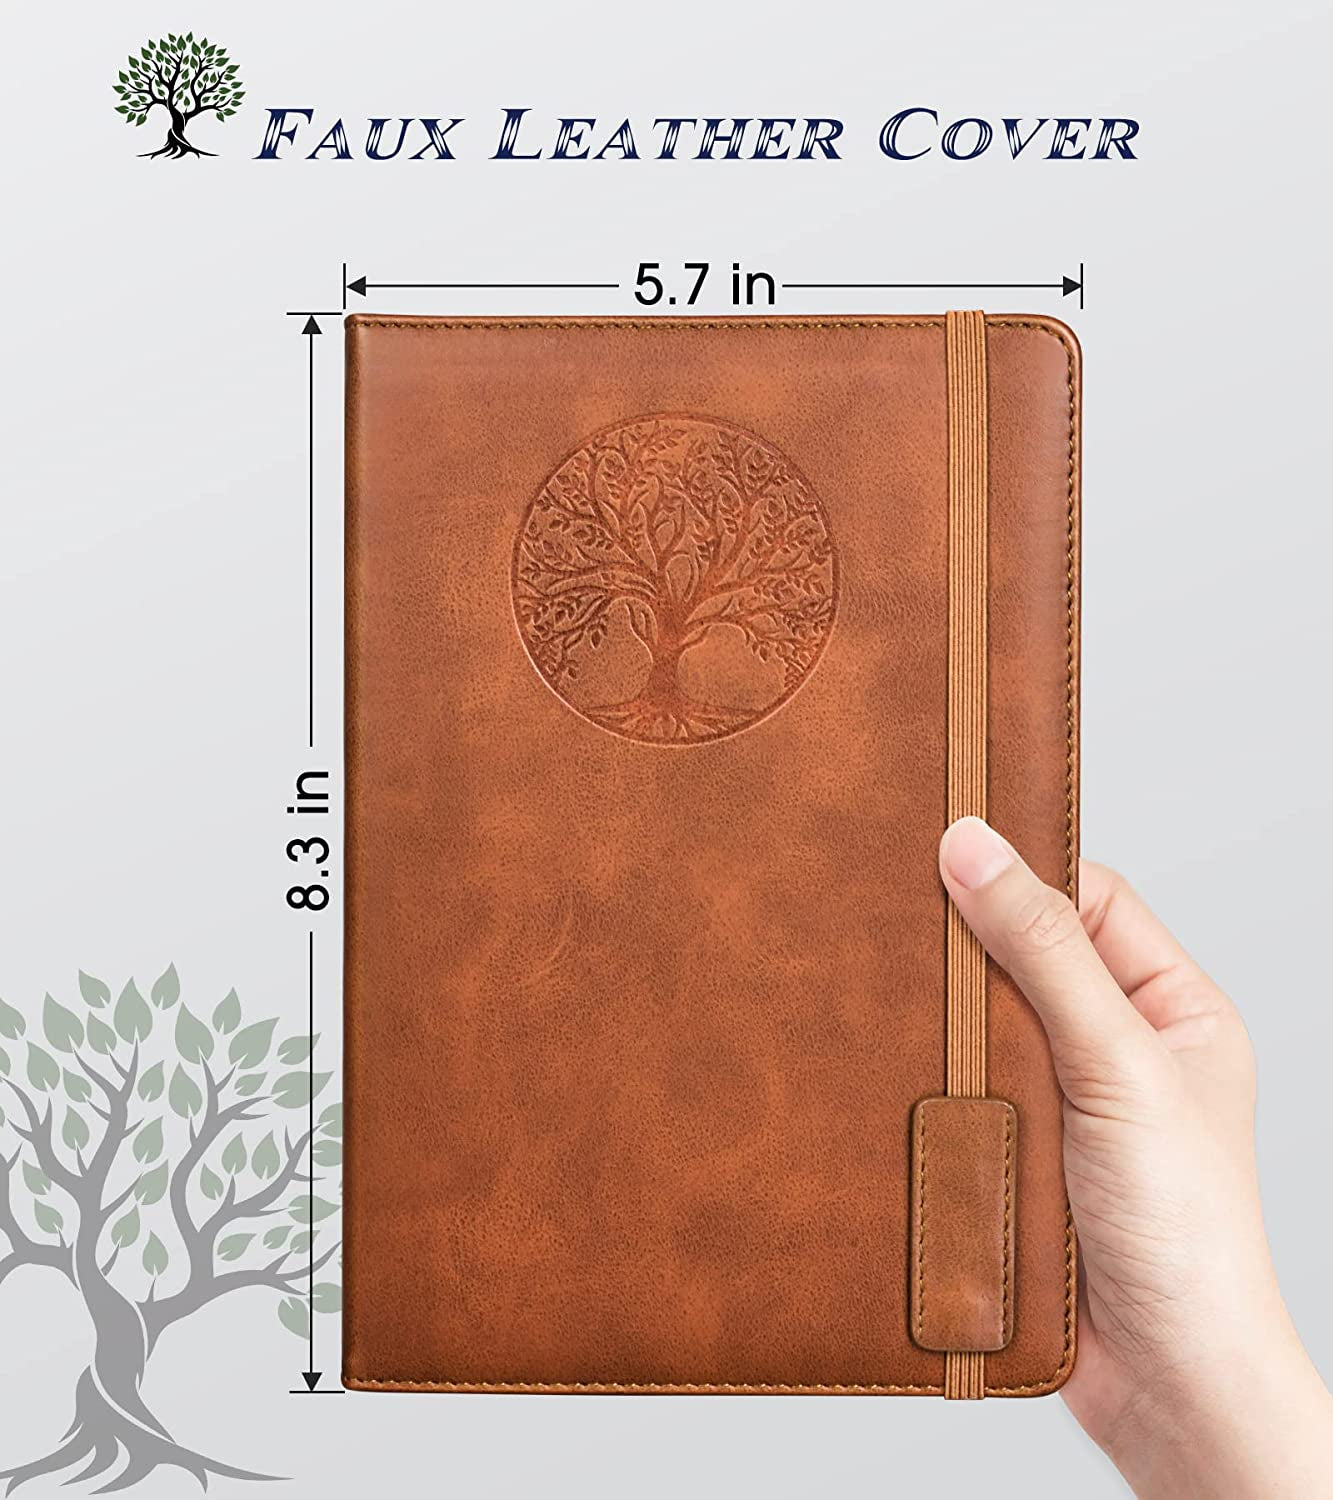 Lined Journal Notebook for Women Men,256 Pages A5 Hardcover Leather Journals for Writing,Travel,Business,Work & School,College Ruled Notebooks for Note Taking,Diary Notepad 5.7"×8.3"(Brown)